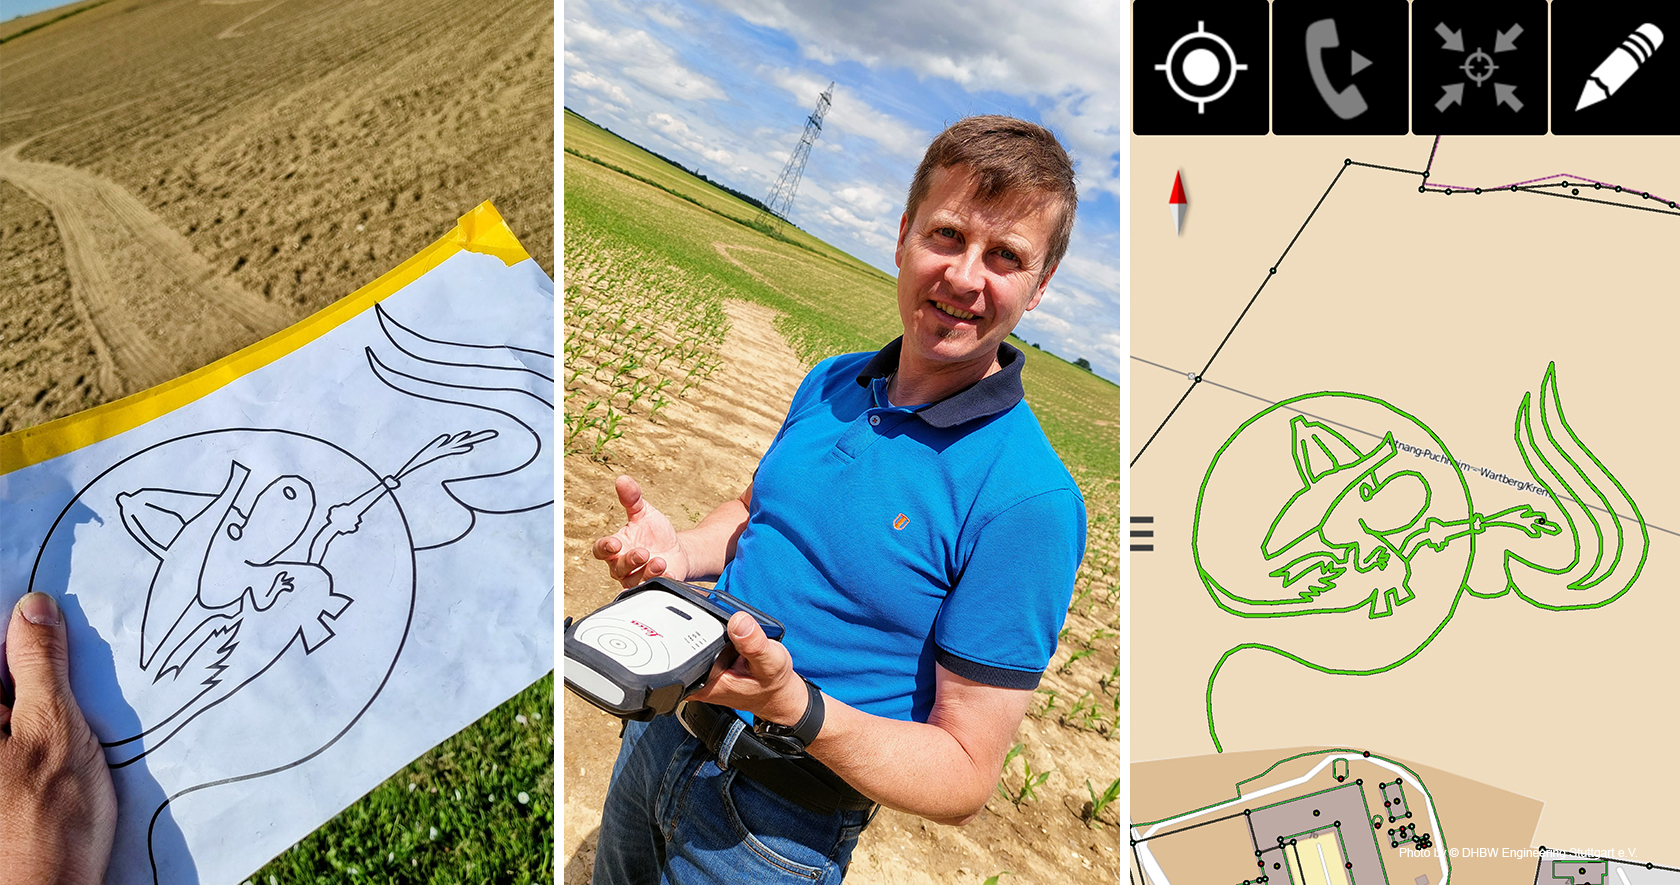 corn maze design as a paper drawing and in GIS software for stakeout with the FLX100